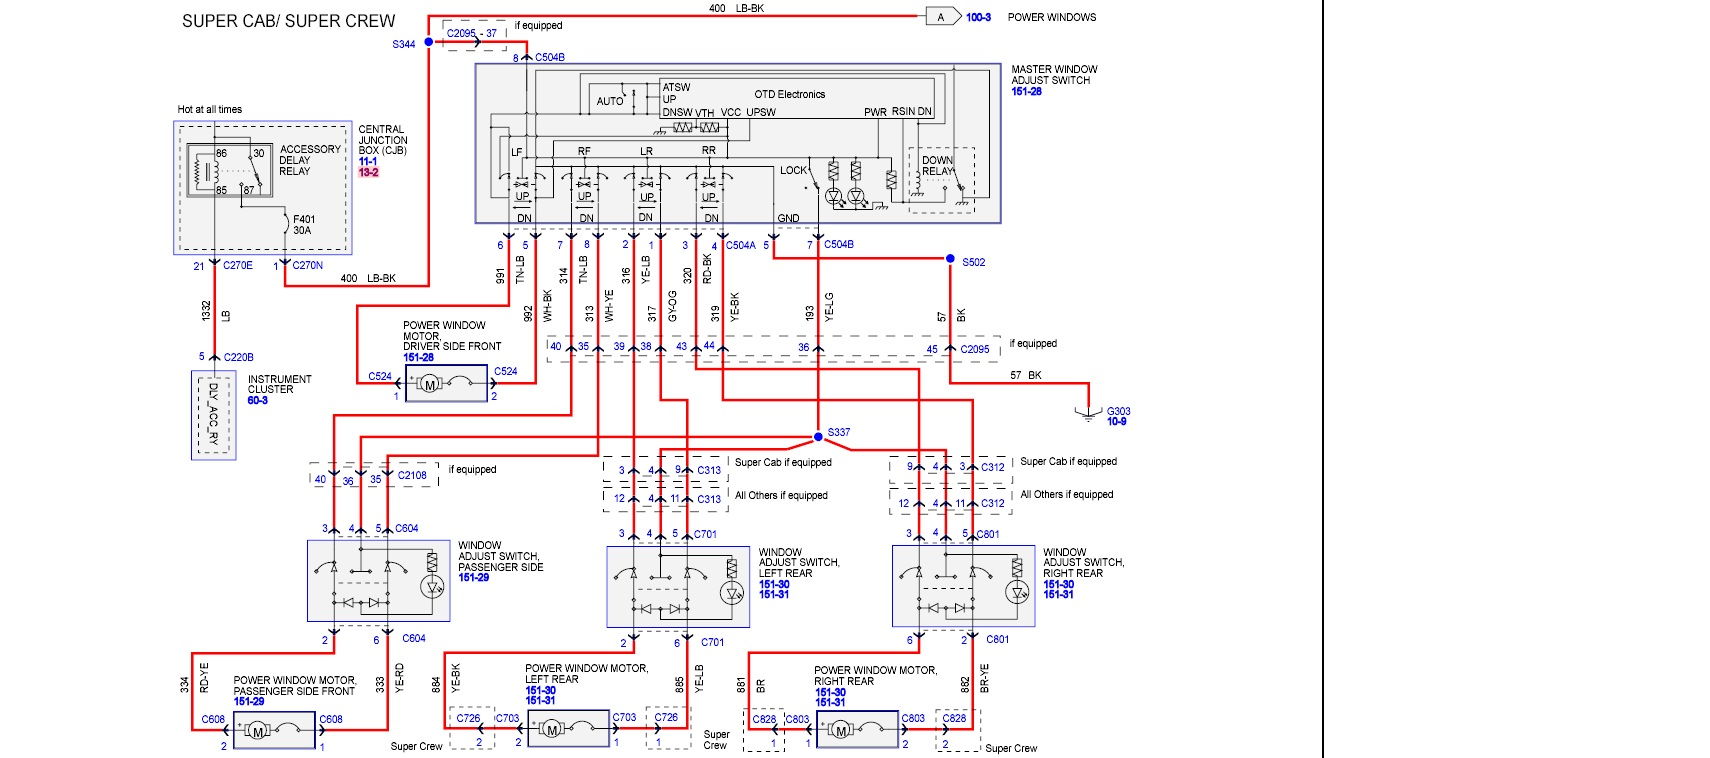 Wiring Diagram For Power Window Switches from cimg8.ibsrv.net